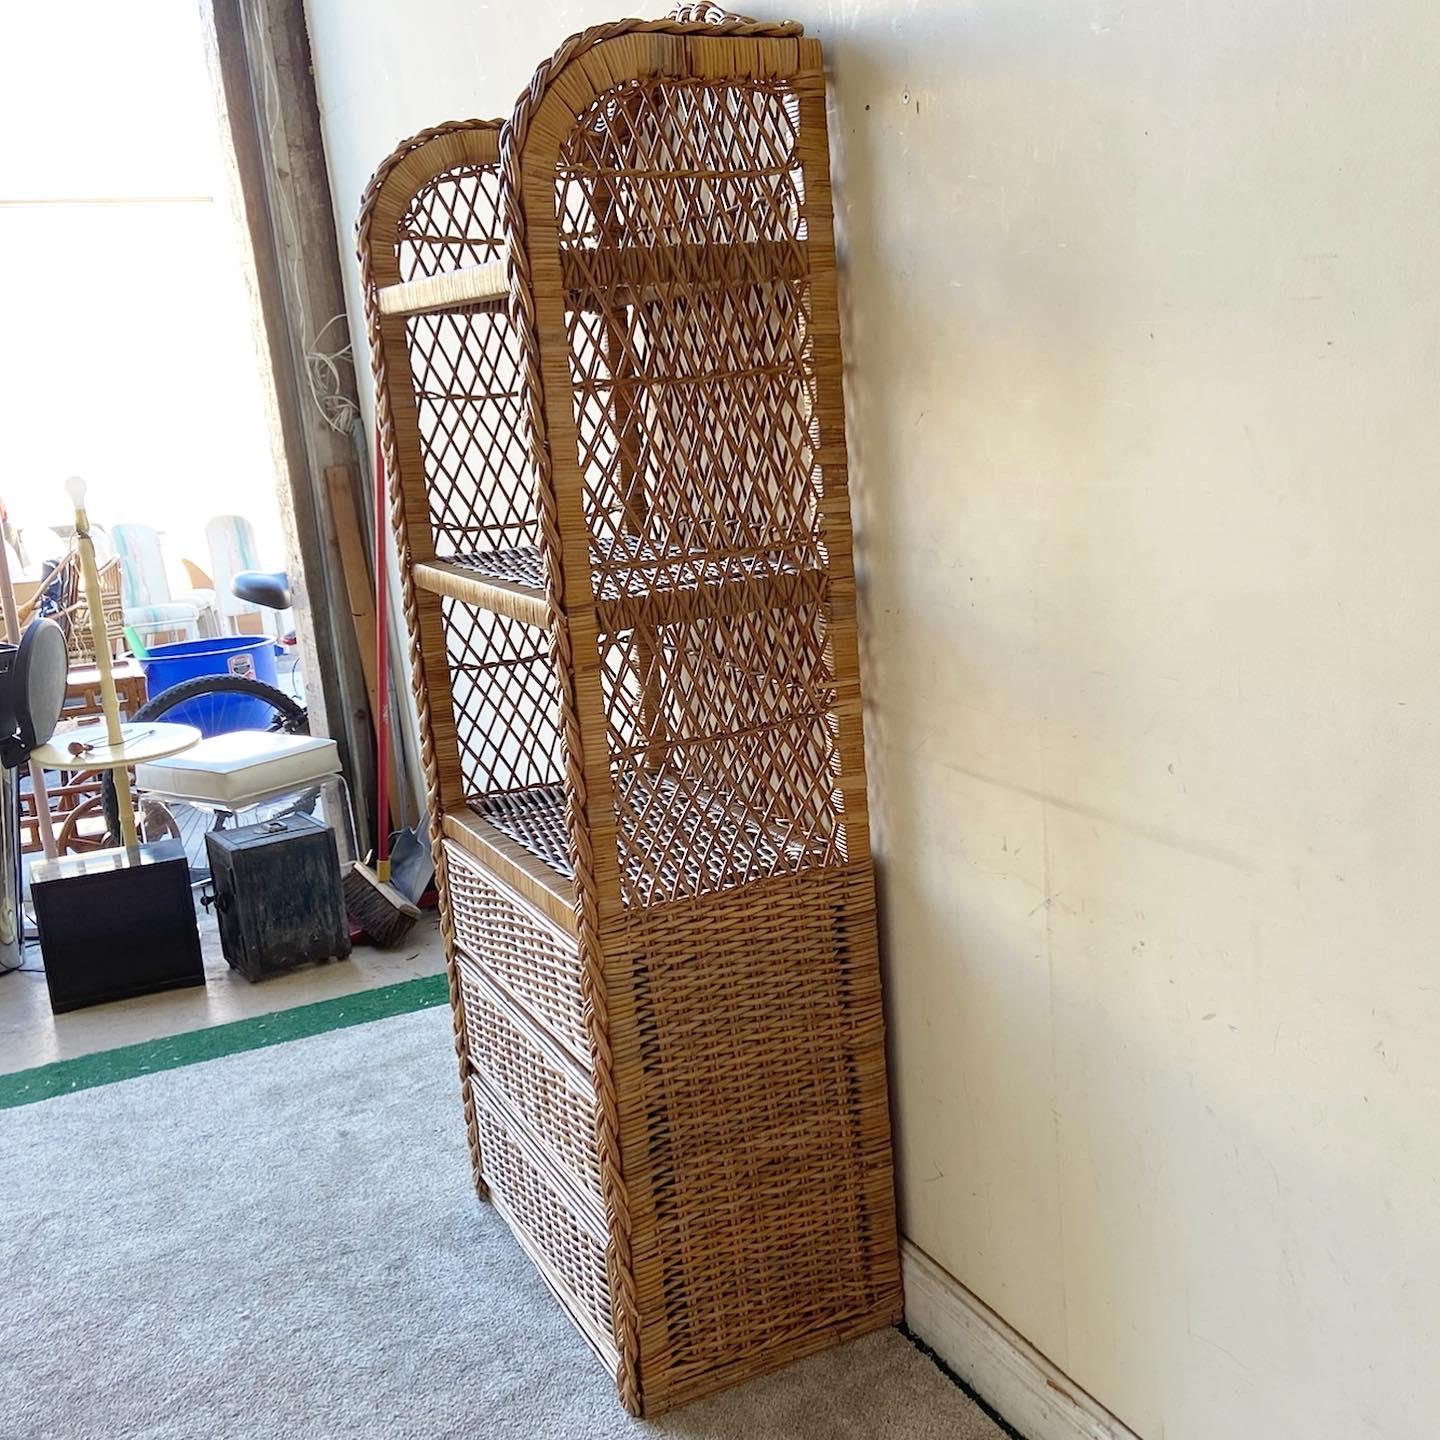 Vintage Boho Chic Woven Wicker Etagere In Good Condition For Sale In Delray Beach, FL